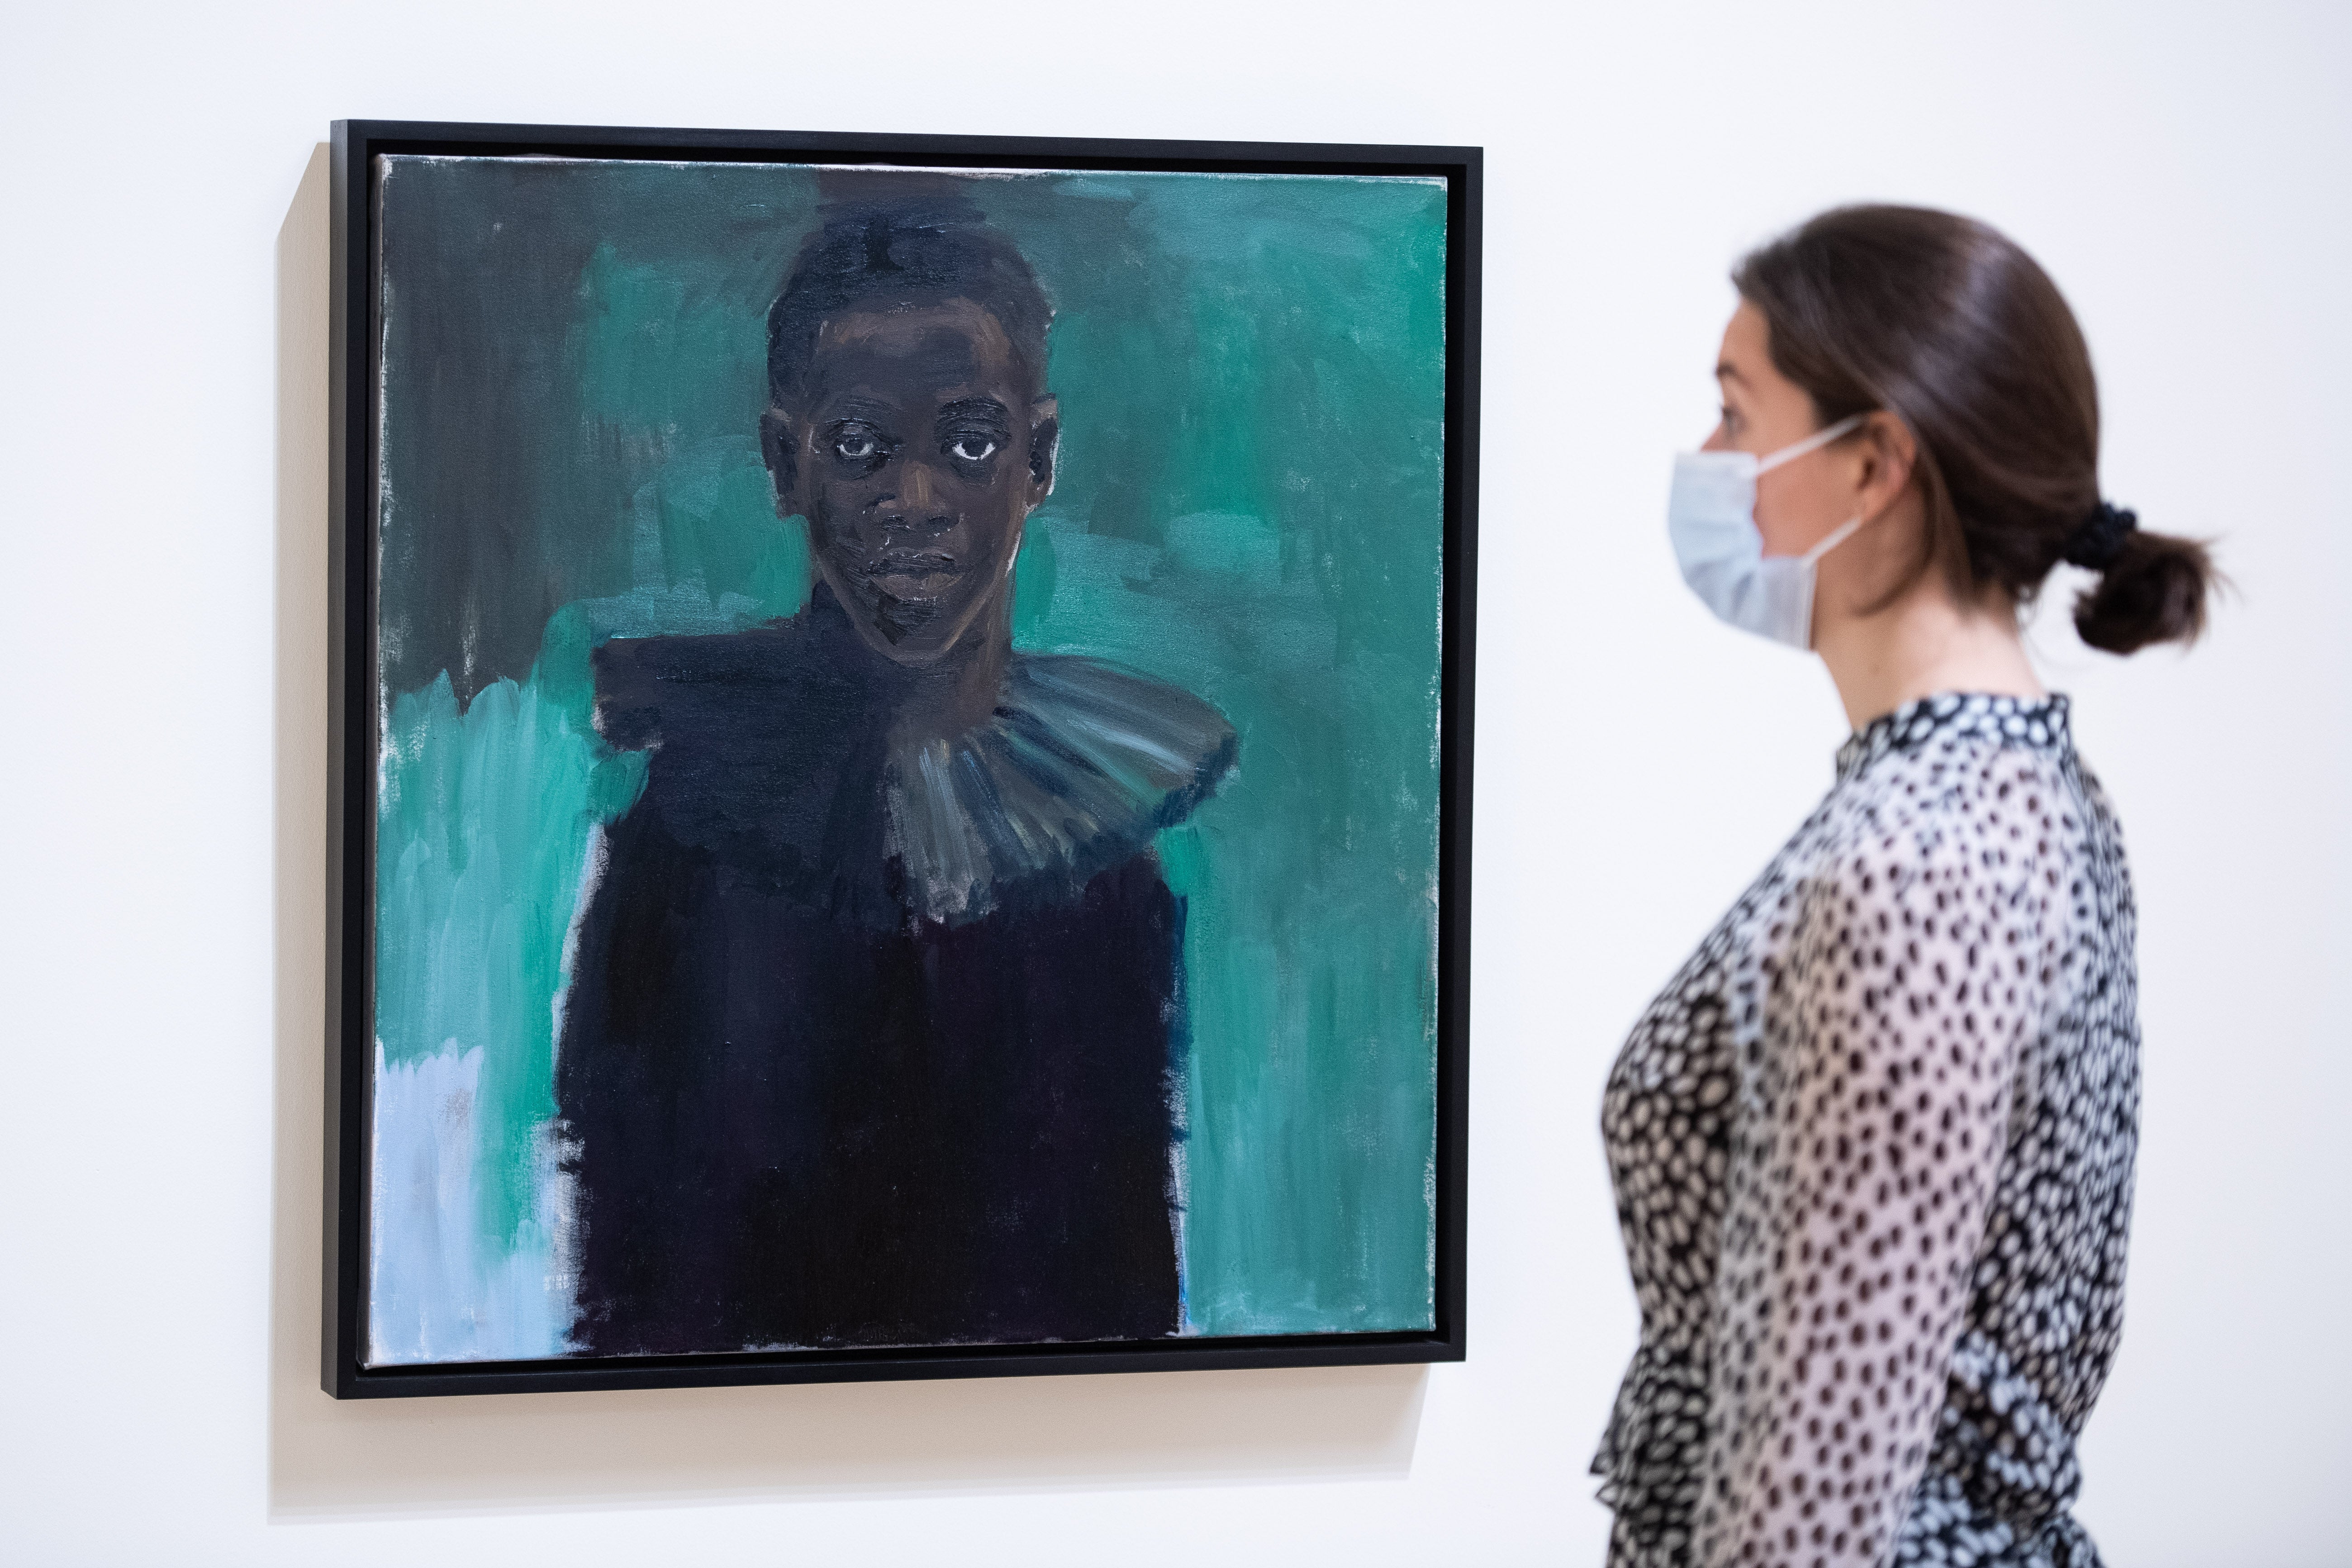 ‘A Passion Like No Other’ (2012) is among the paintings included in the Fly In League With The Night exhibition at Tate Britain until 9 May 2021